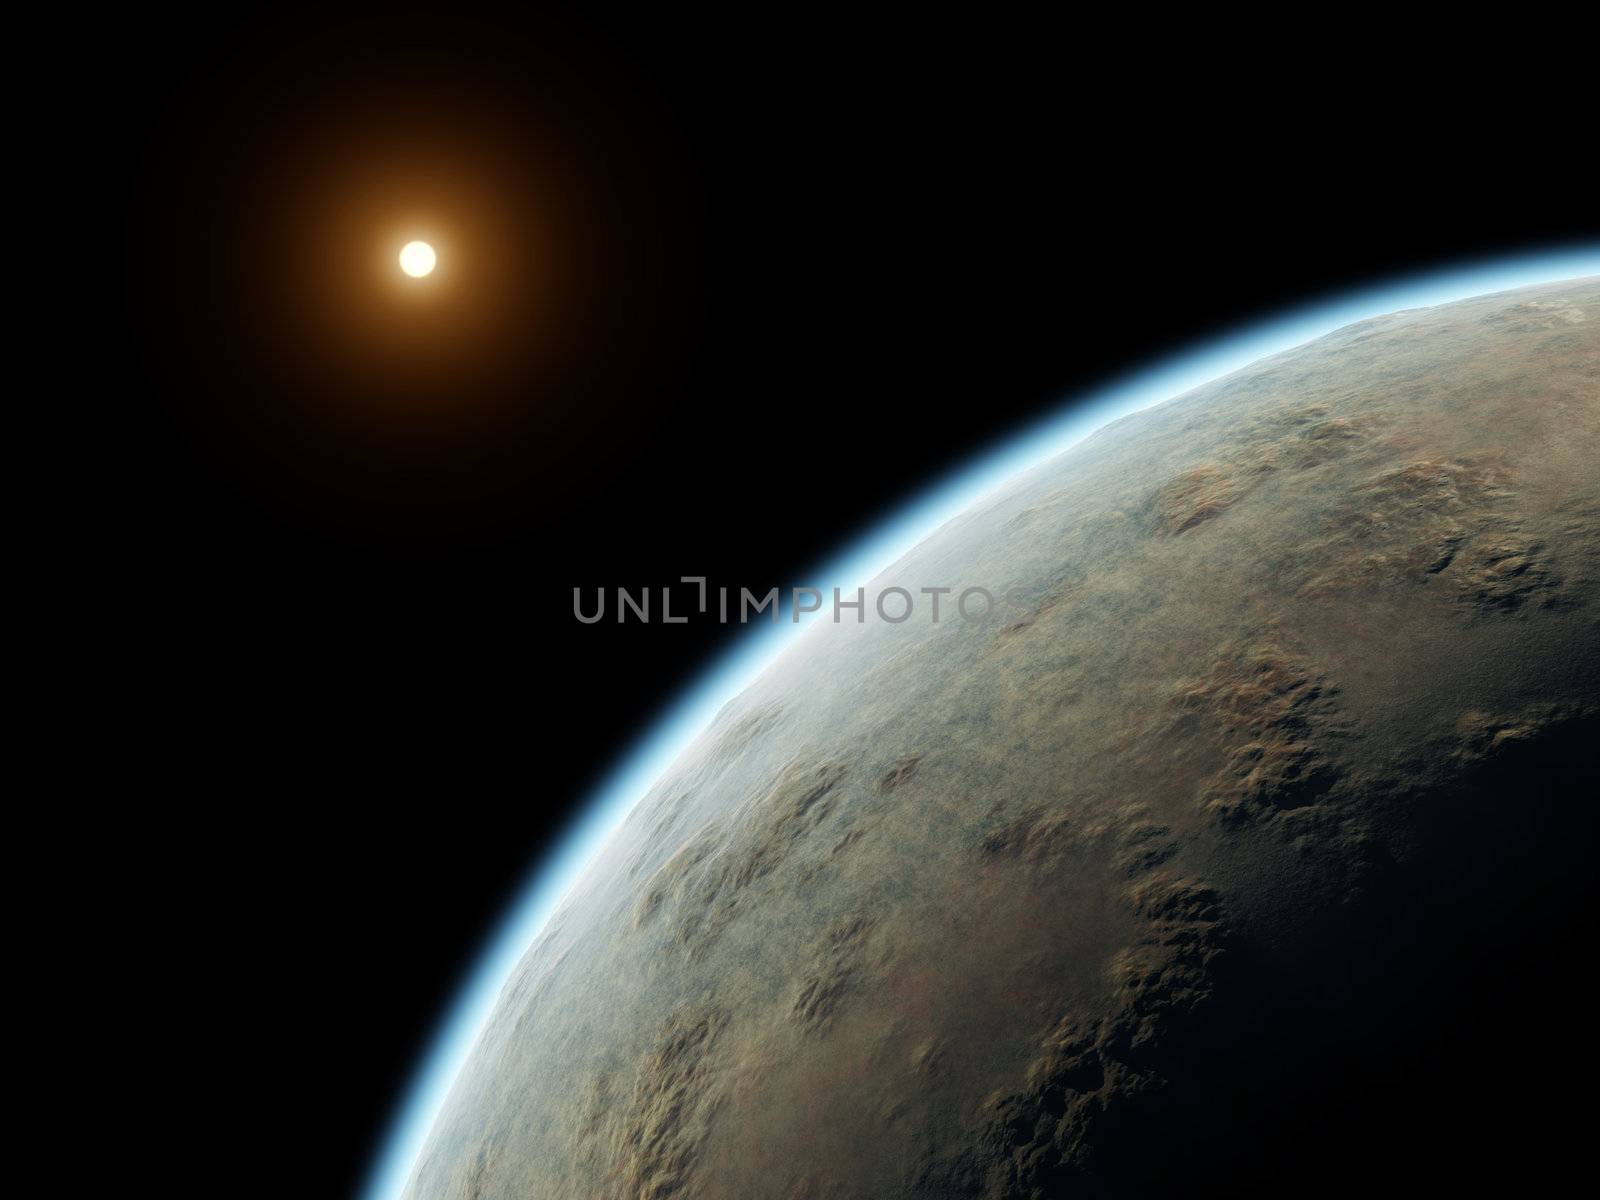 An illustration of a nice deep space planet with a red sun